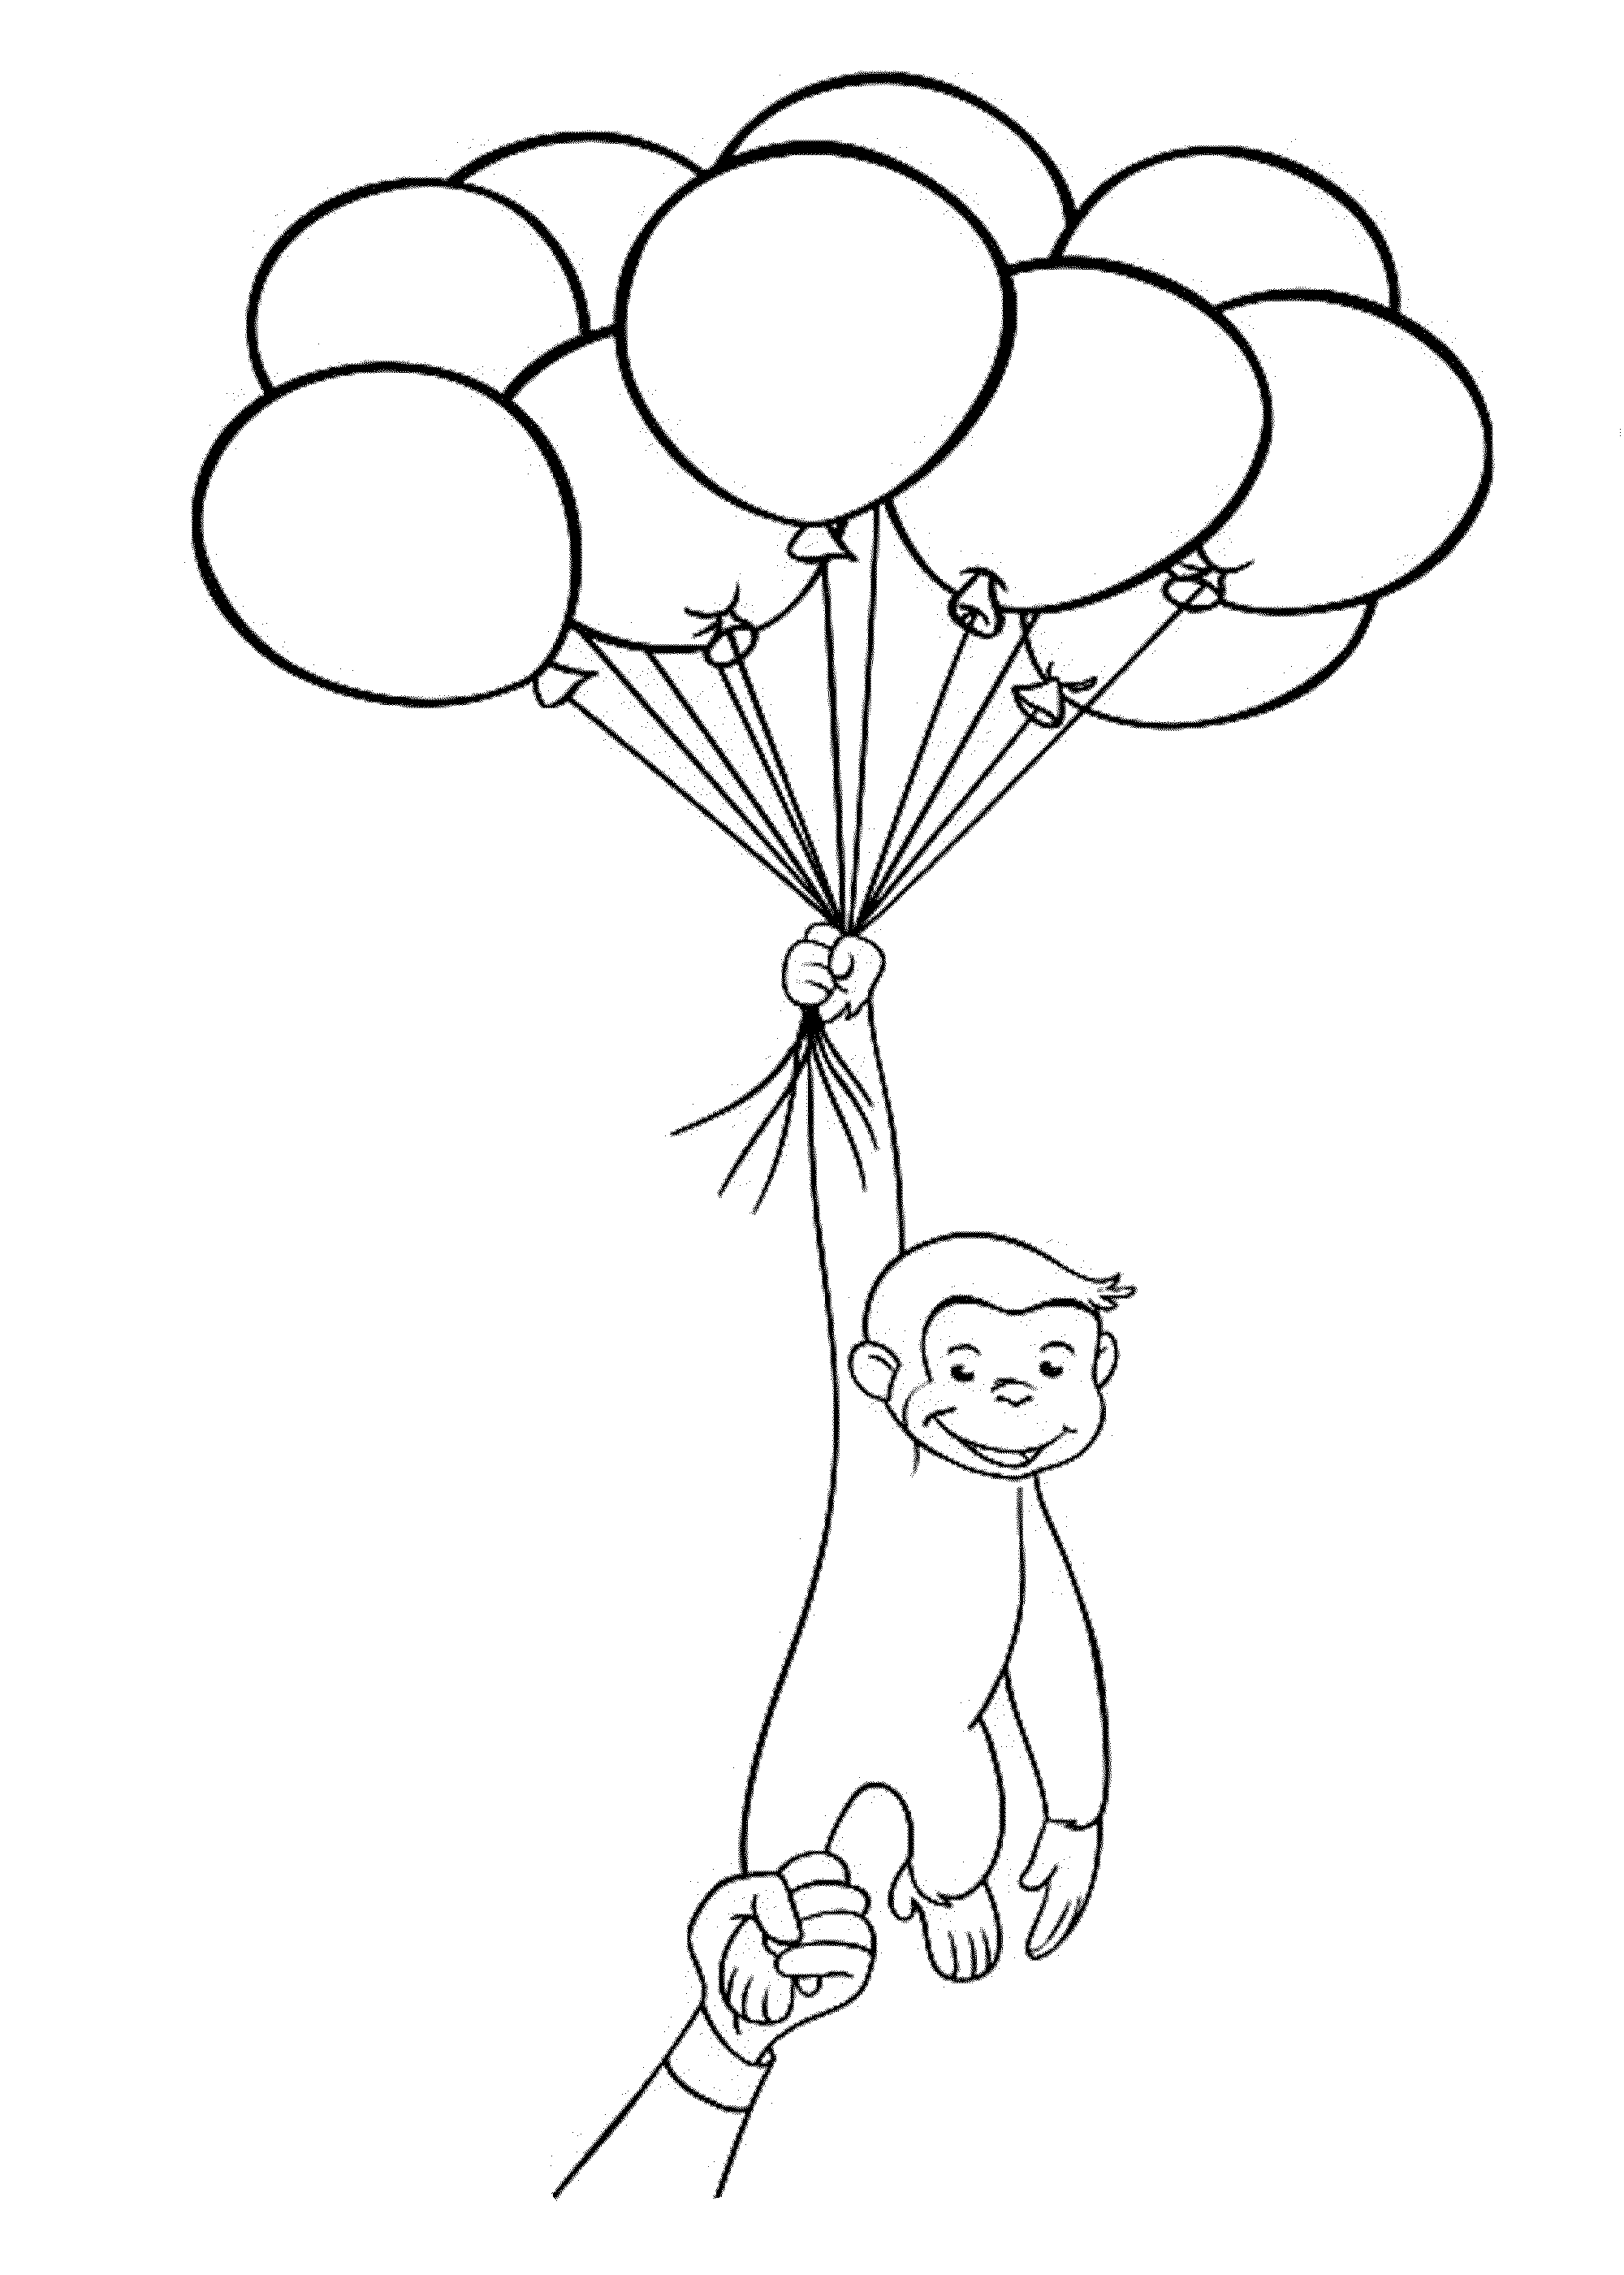 curious-george-with-balloons-coloring-pages | | BestAppsForKids.com